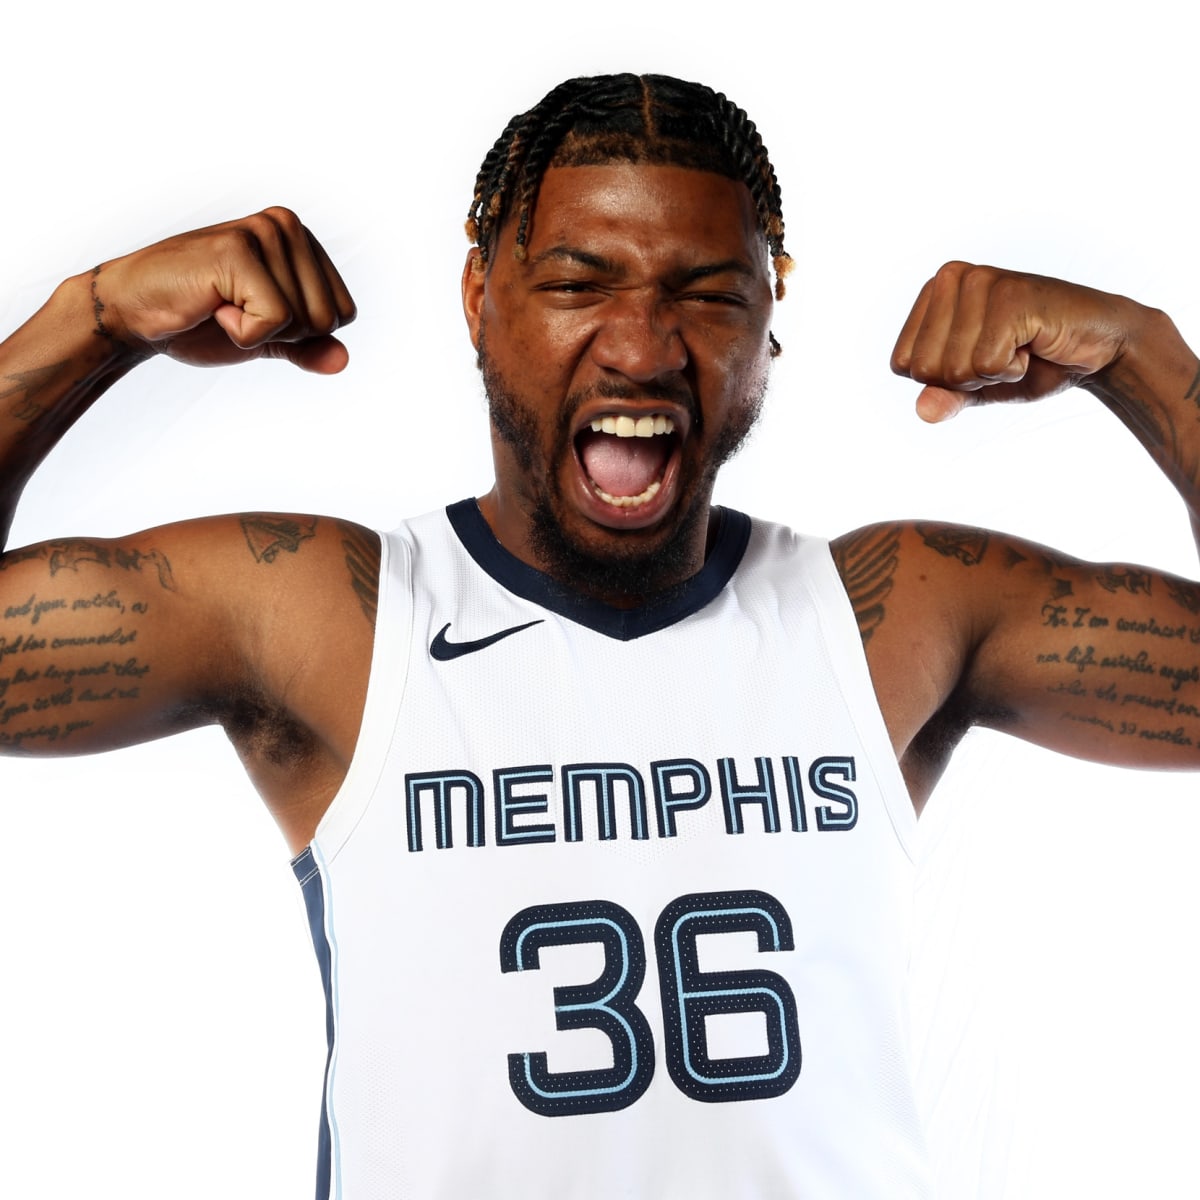 New chairman: Memphis really owns the Grizzlies - Sports Illustrated